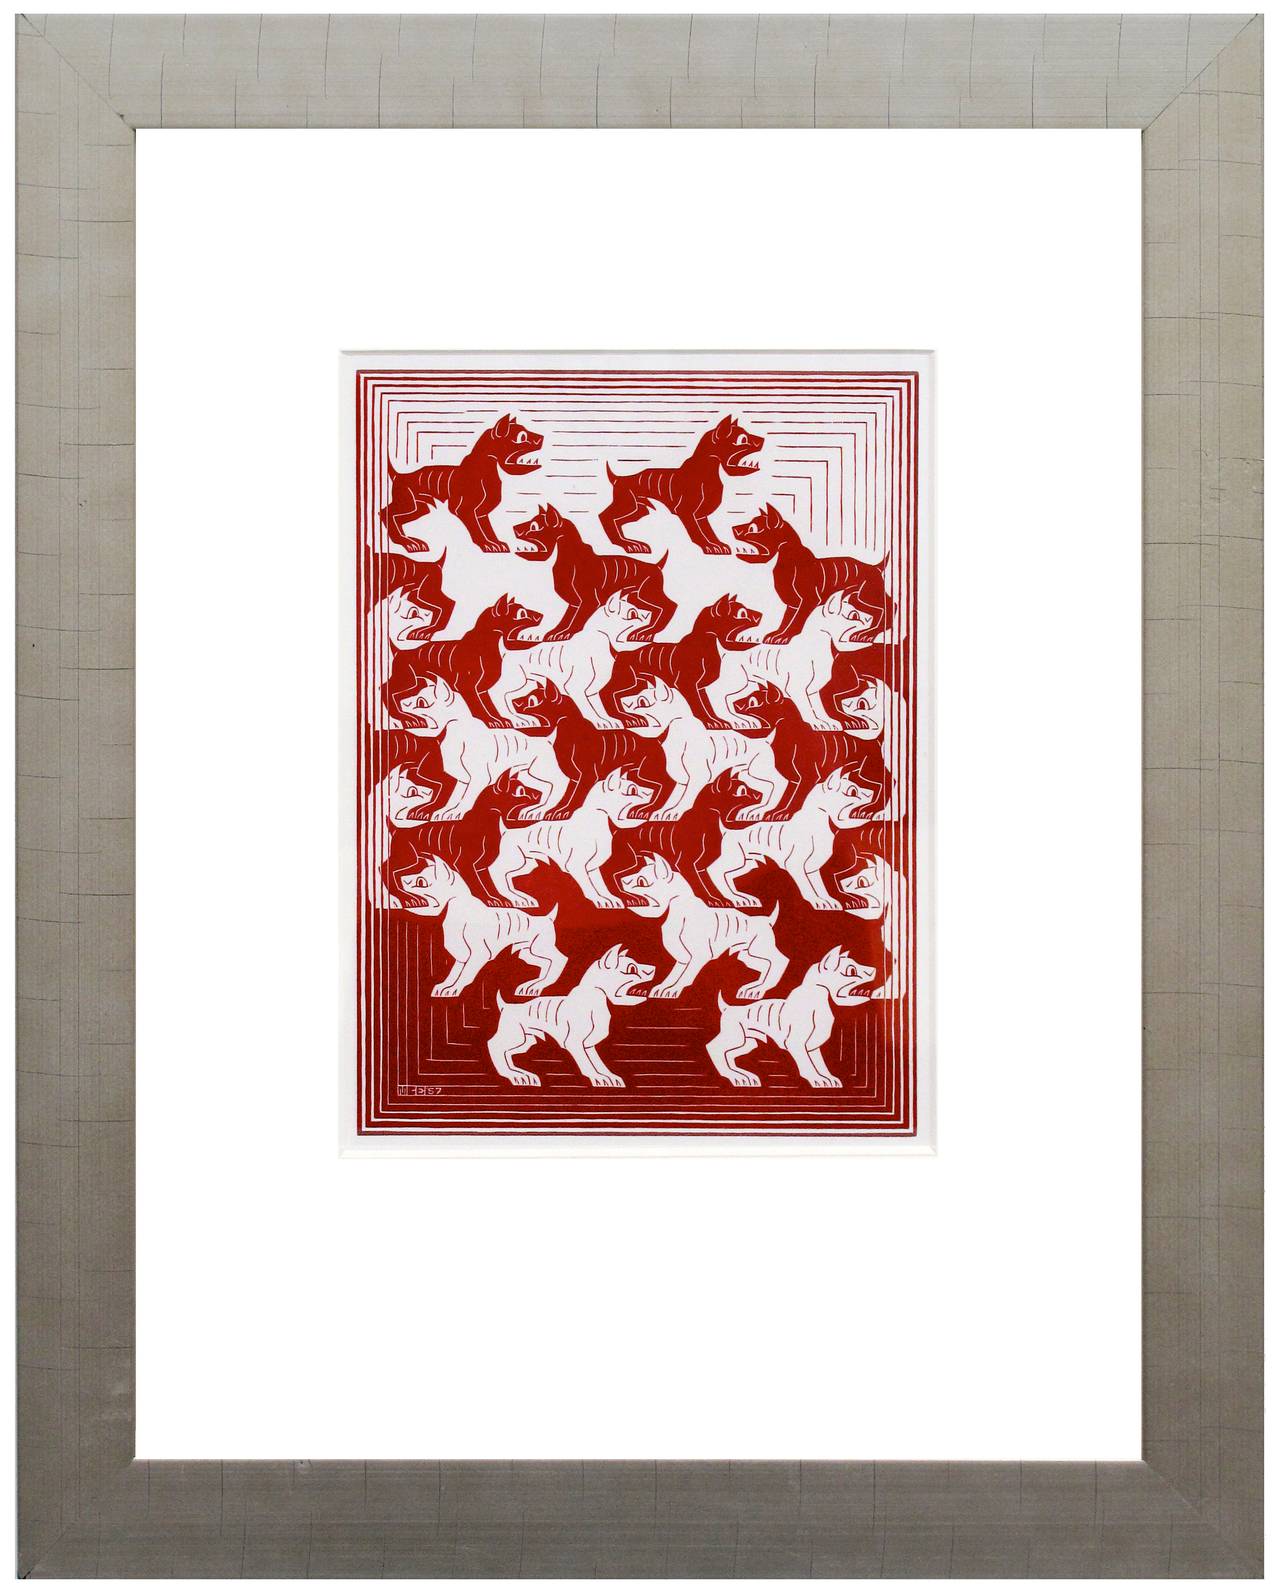 Regular Division of the Plane IV (Red Dogs) - Print by M.C. Escher